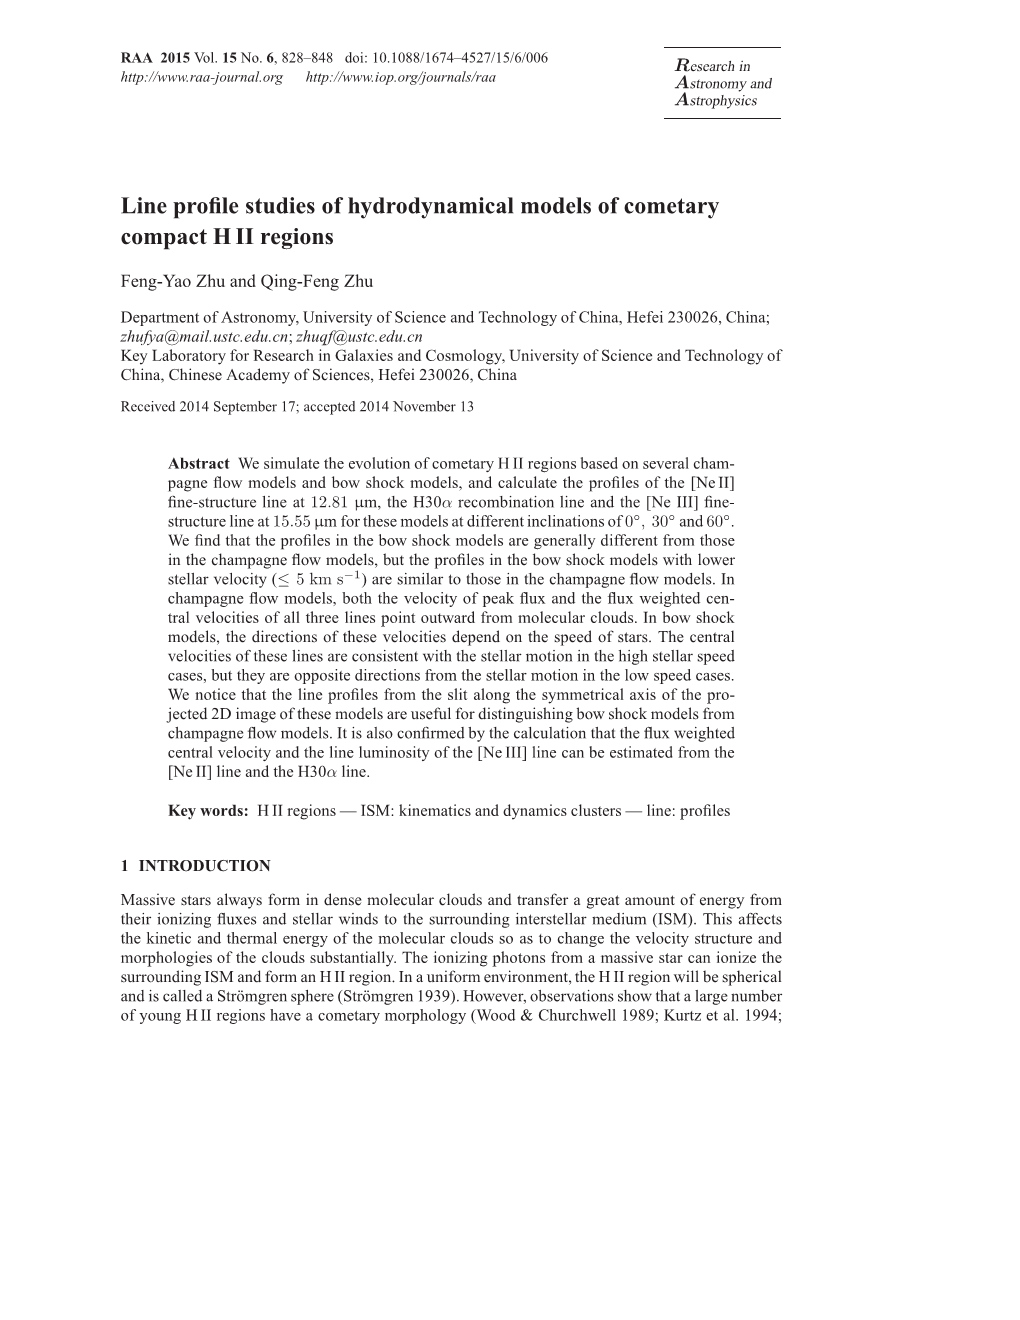 Line Profile Studies of Hydrodynamical Models of Cometary Compact H II